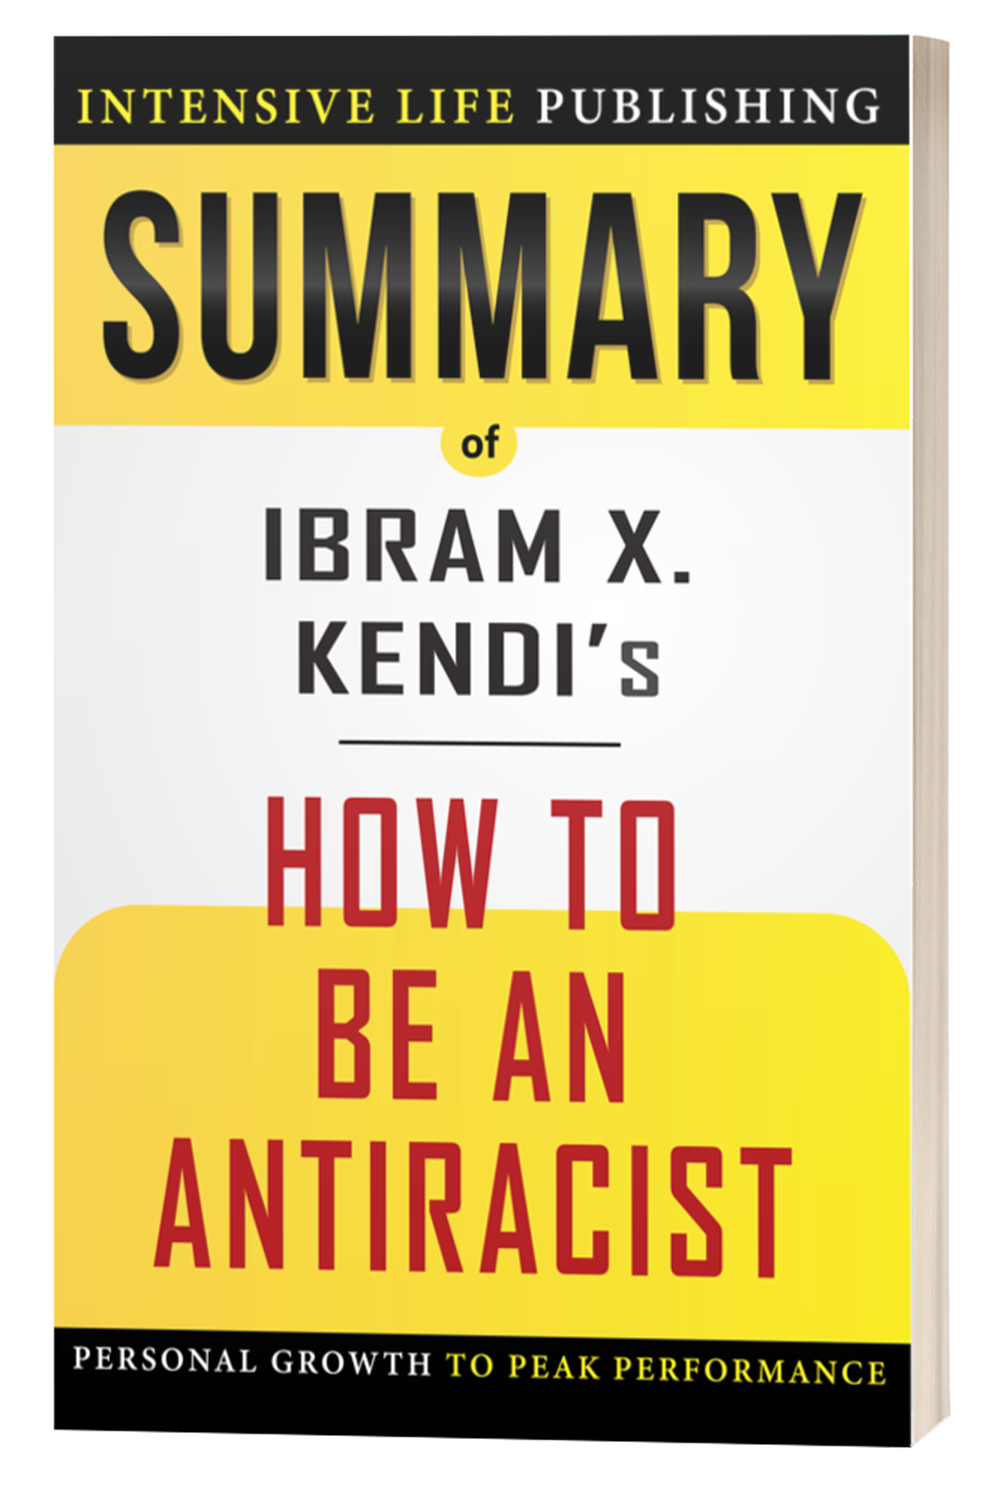 Summary of How to Be an Antiracist